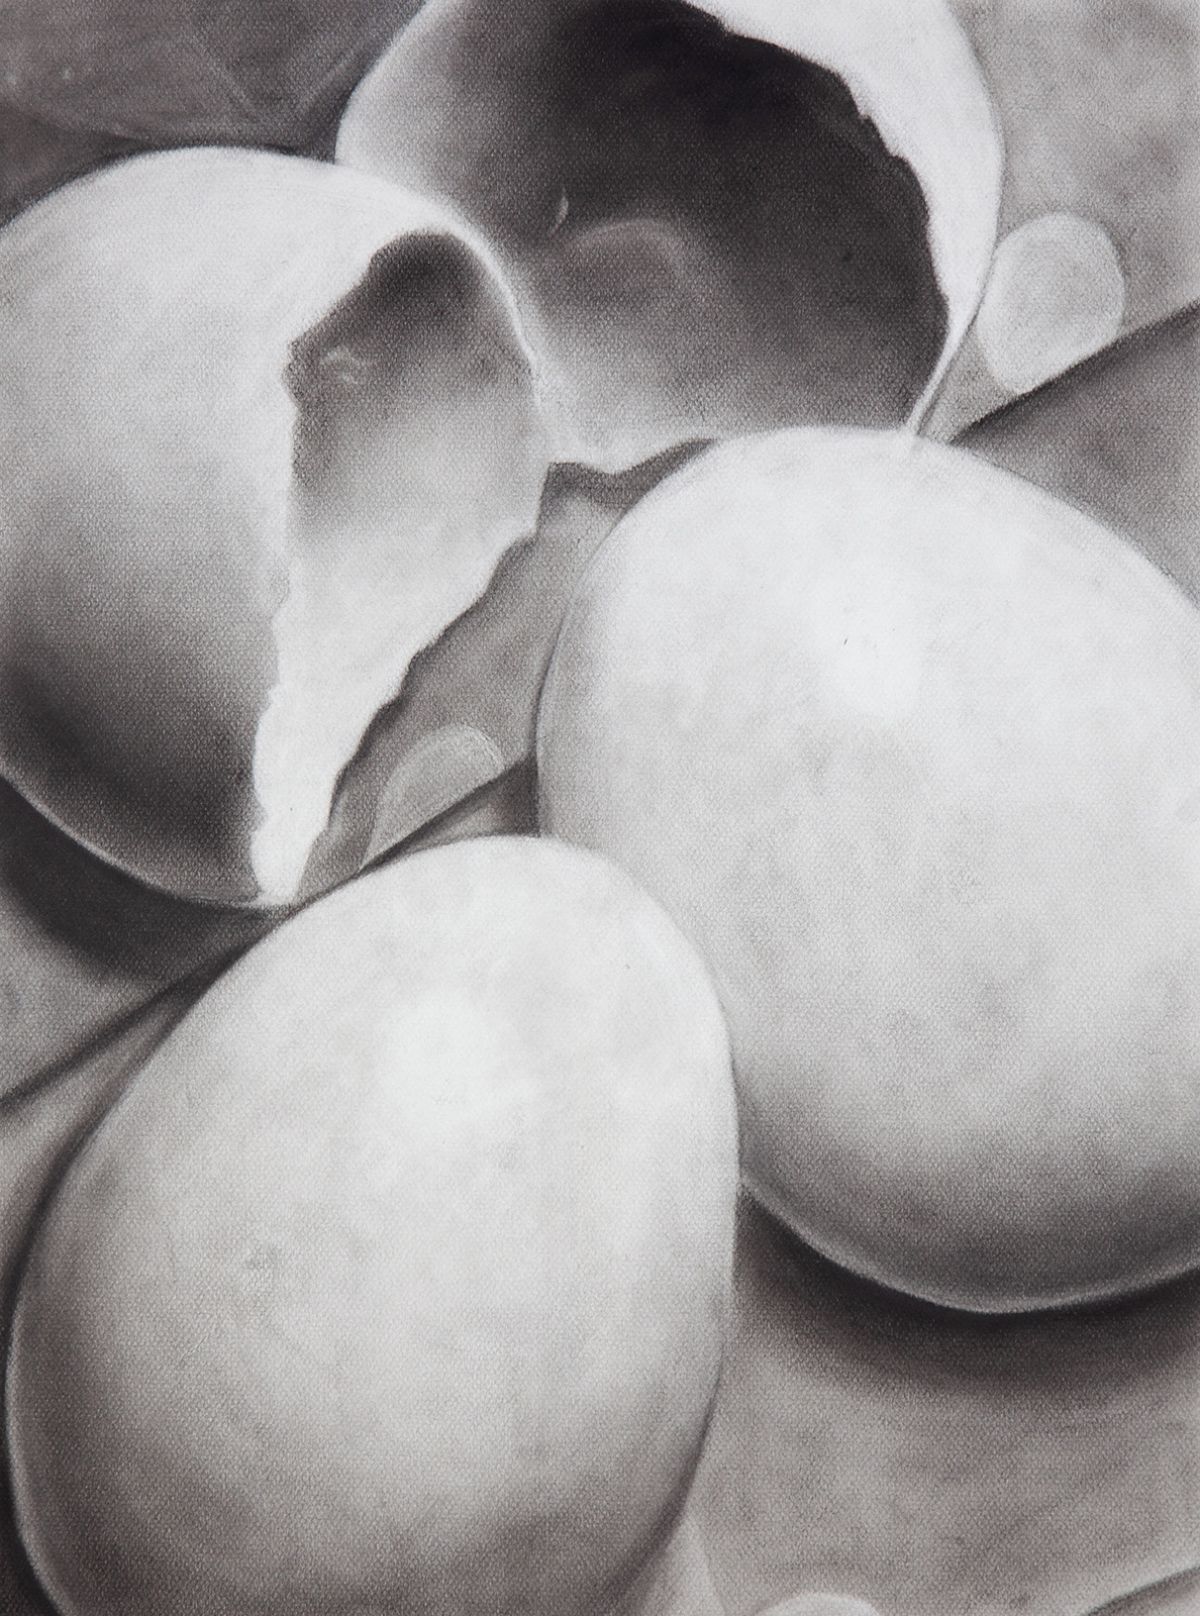 2019, Charcoal on paper, 24 x 18 in.